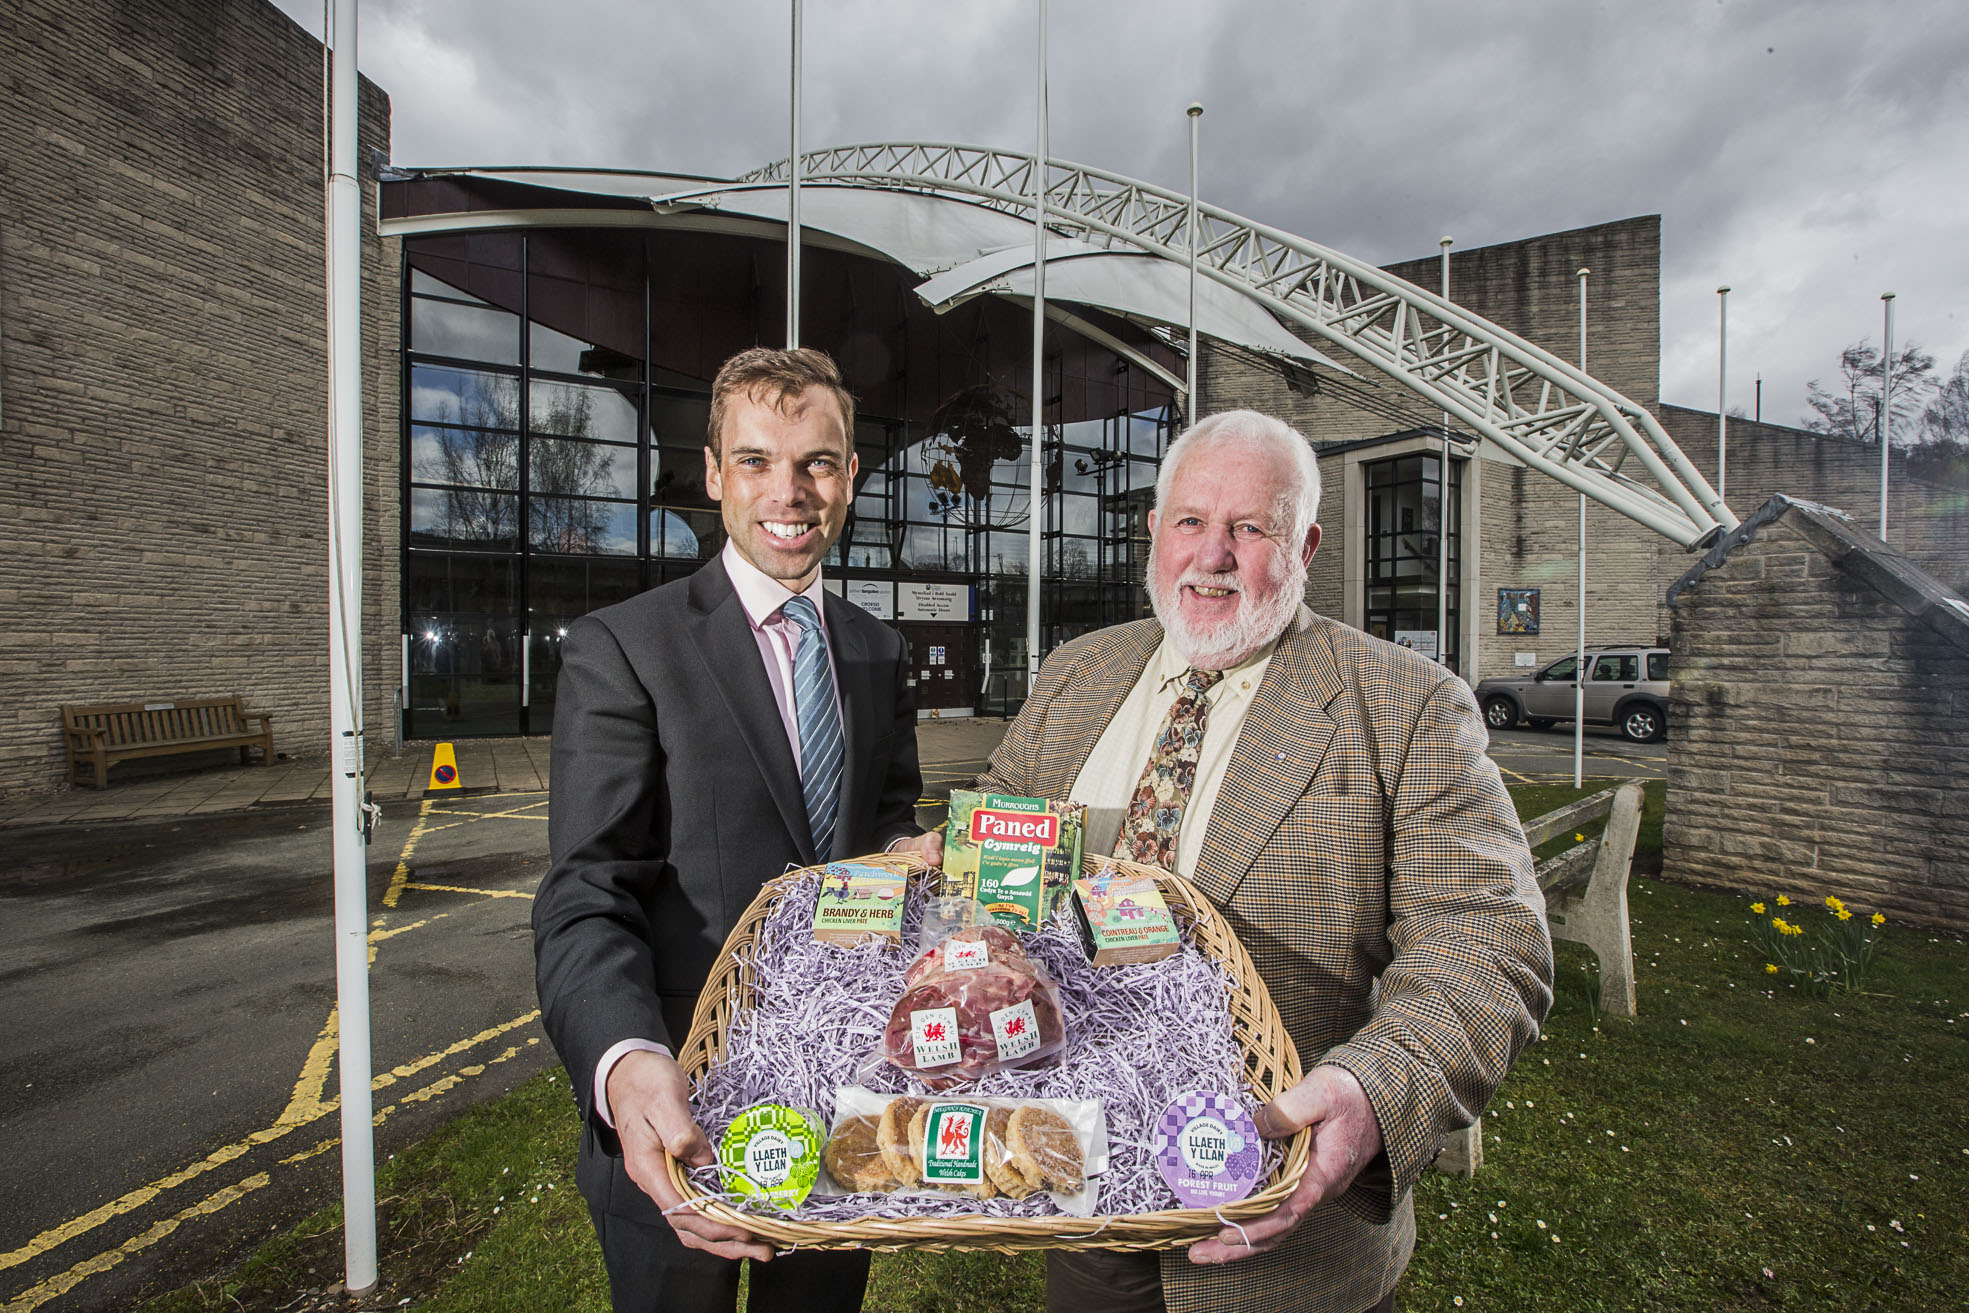 Tourism boss launches appeal for new products for top food festival